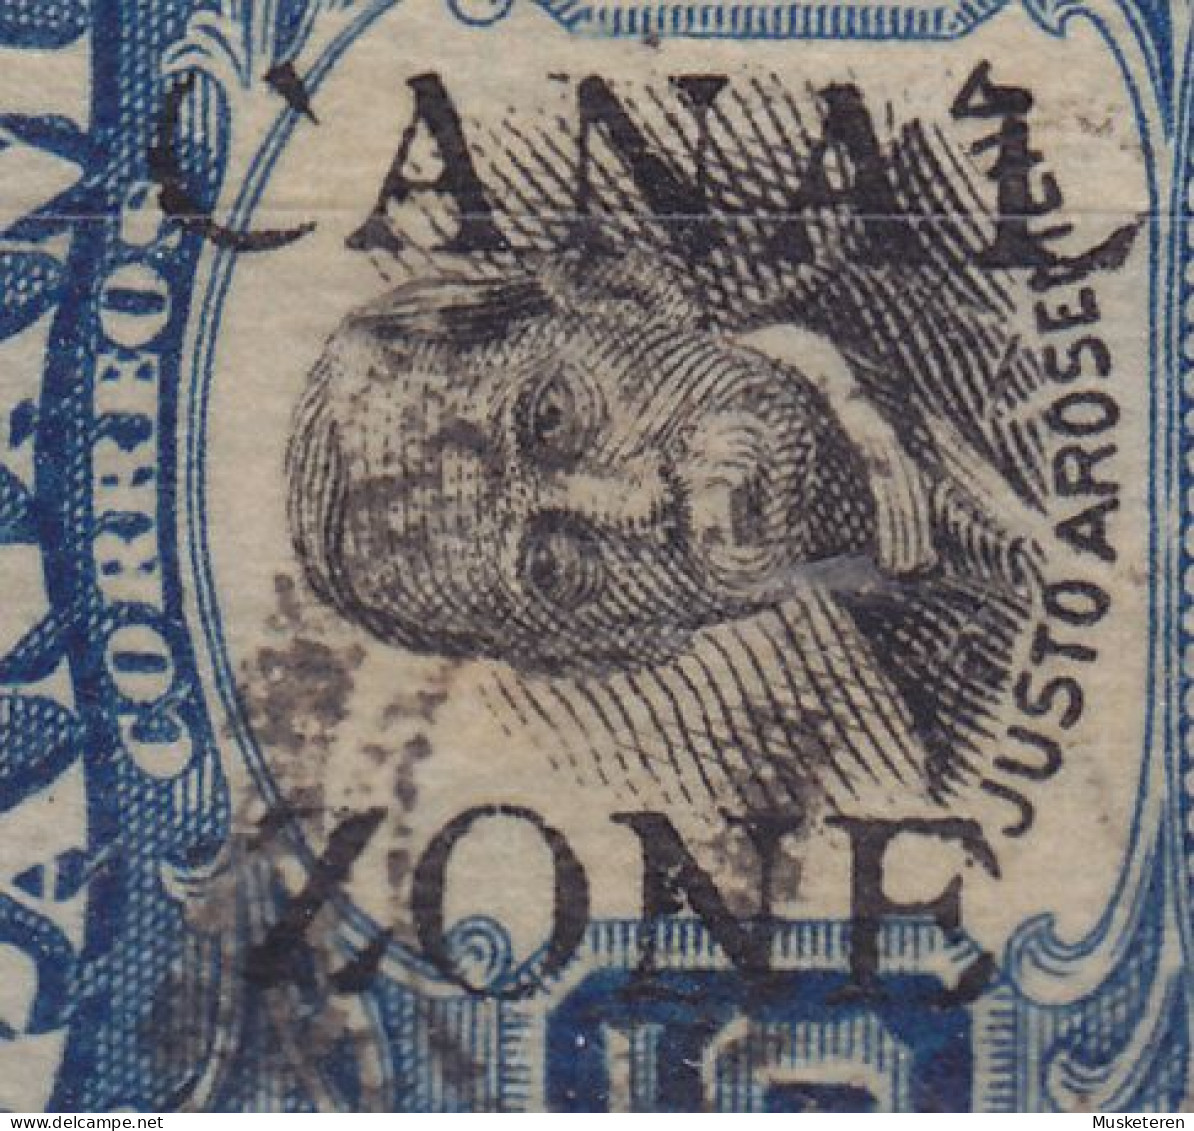 Panama Canal Zone 1906 Mi. 19, Aufdruck Overprinted CANAL ZONE, ERROR Variety 'Part Of 'C' & 'Z' Missing' (2 Scans) - Zona Del Canale / Canal Zone